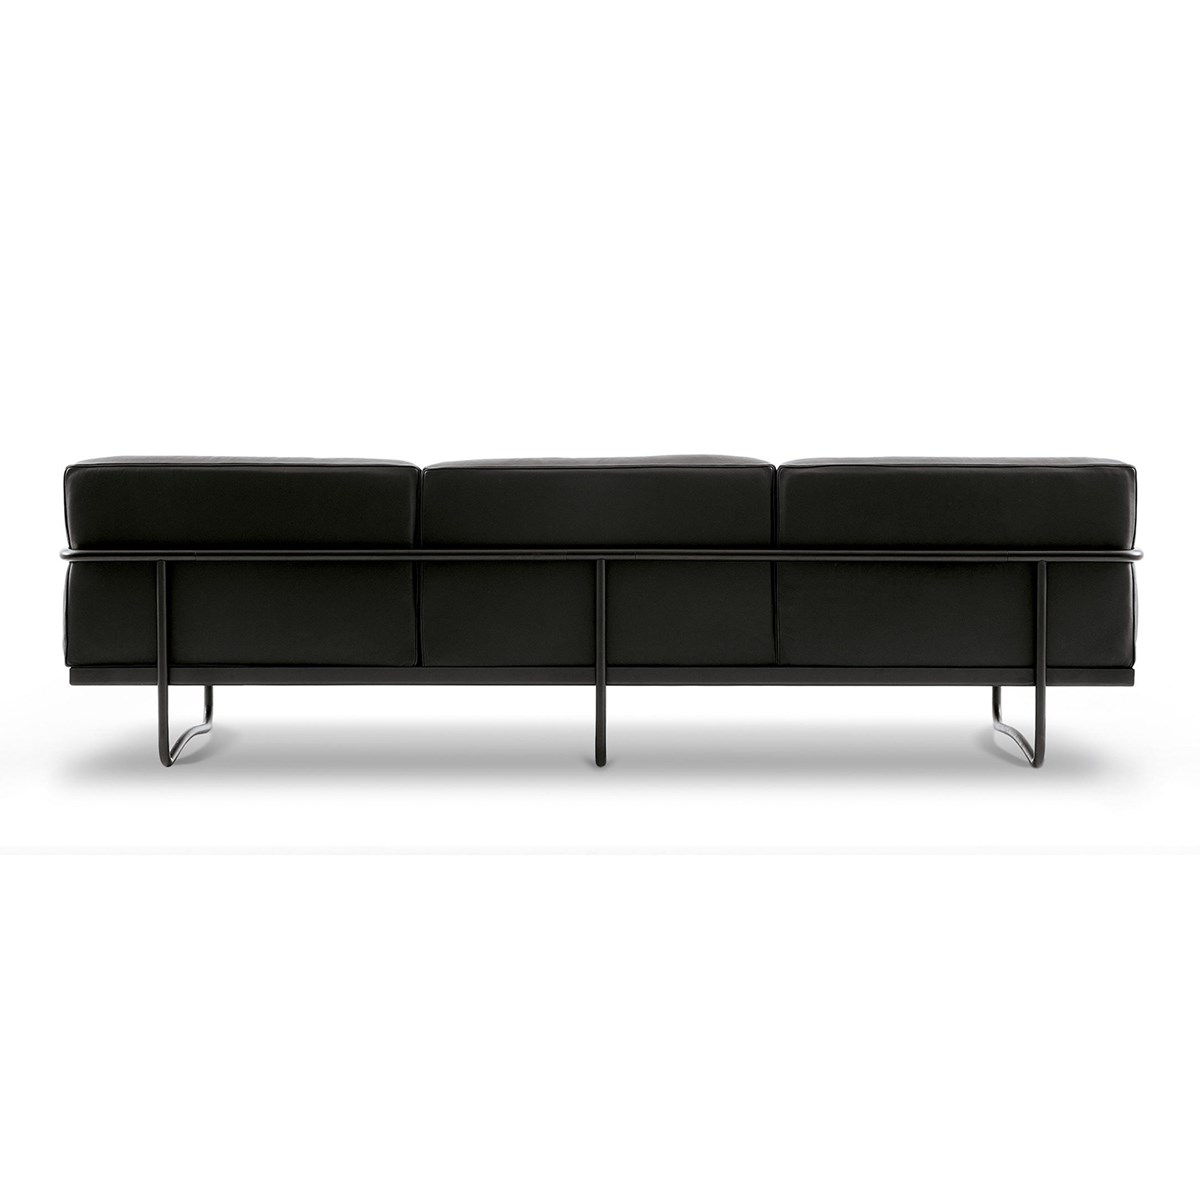 CaCassina-Le Corbusier-Pierre Jeanneret-Charlotte-Perriand-LC5-Sofa-Matisse-3